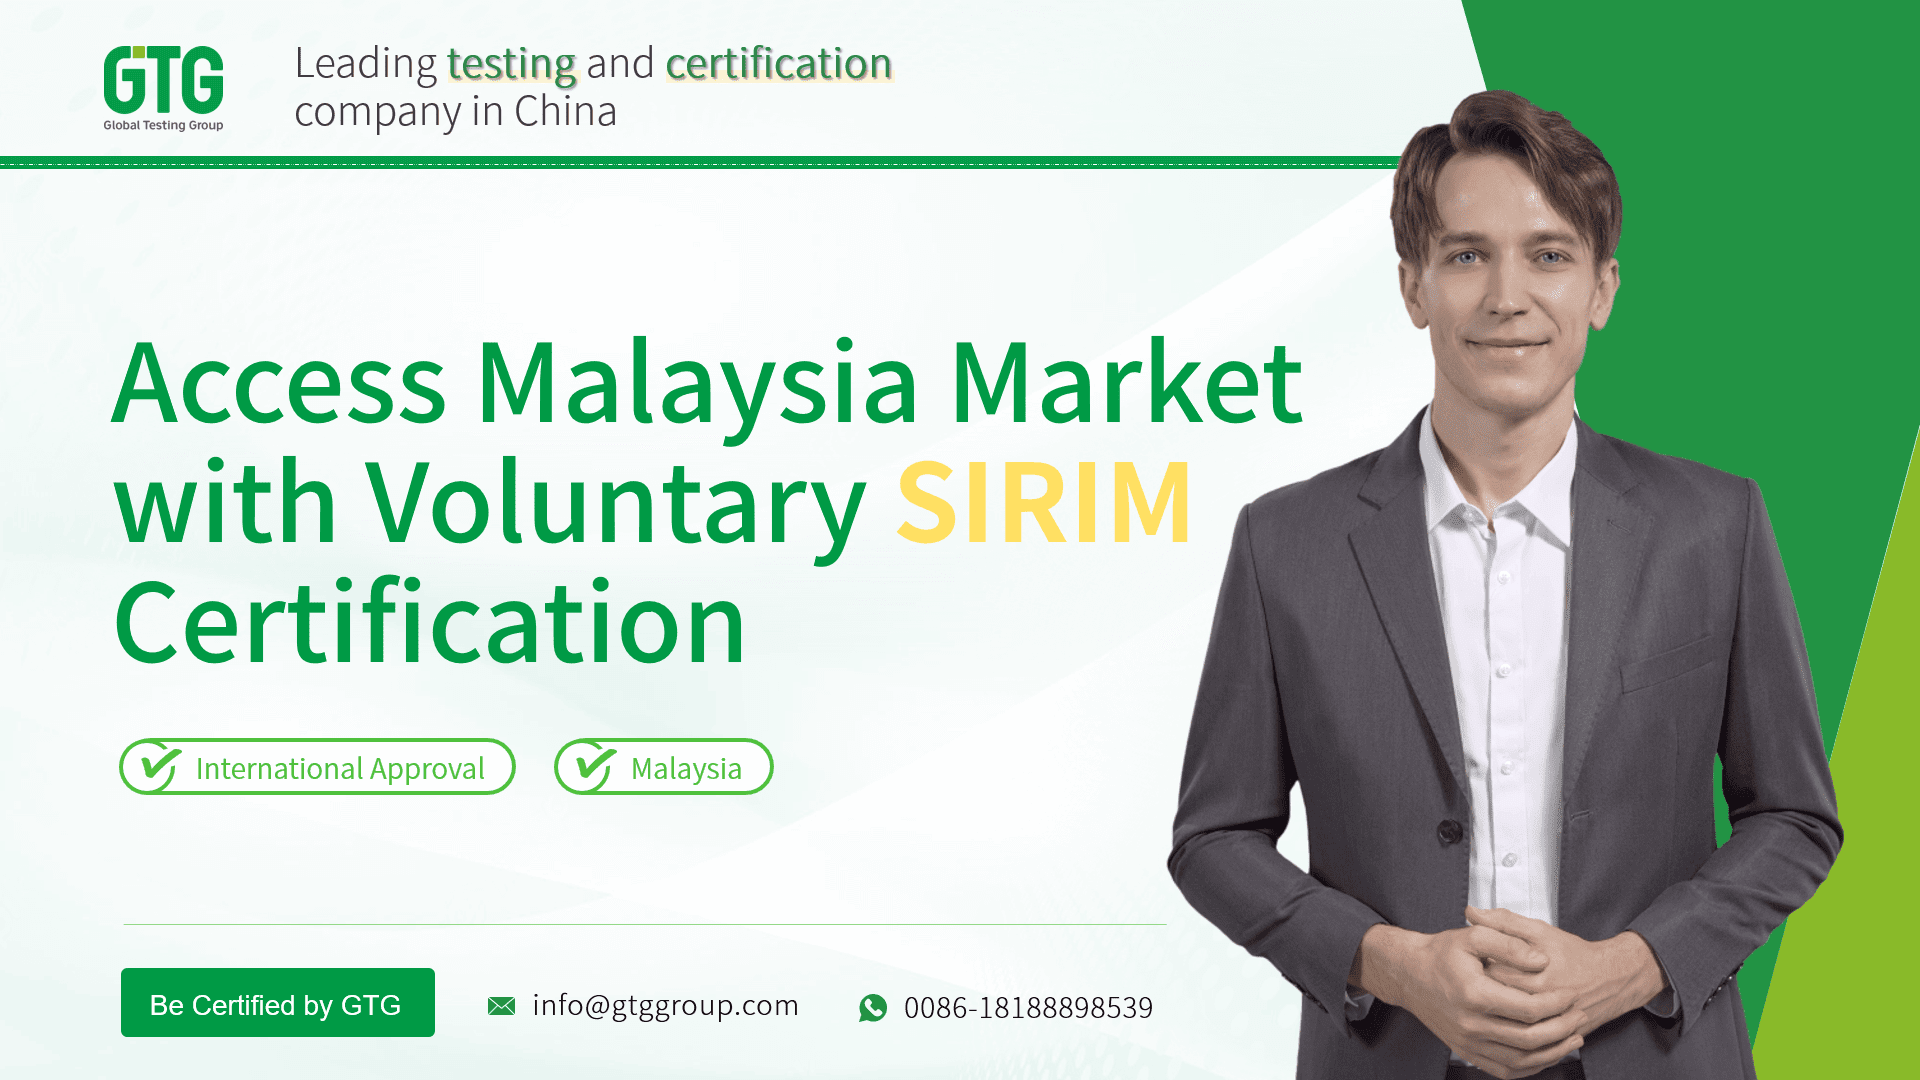 GTG Provides Malaysia SIRIM Certification Recognition Service
